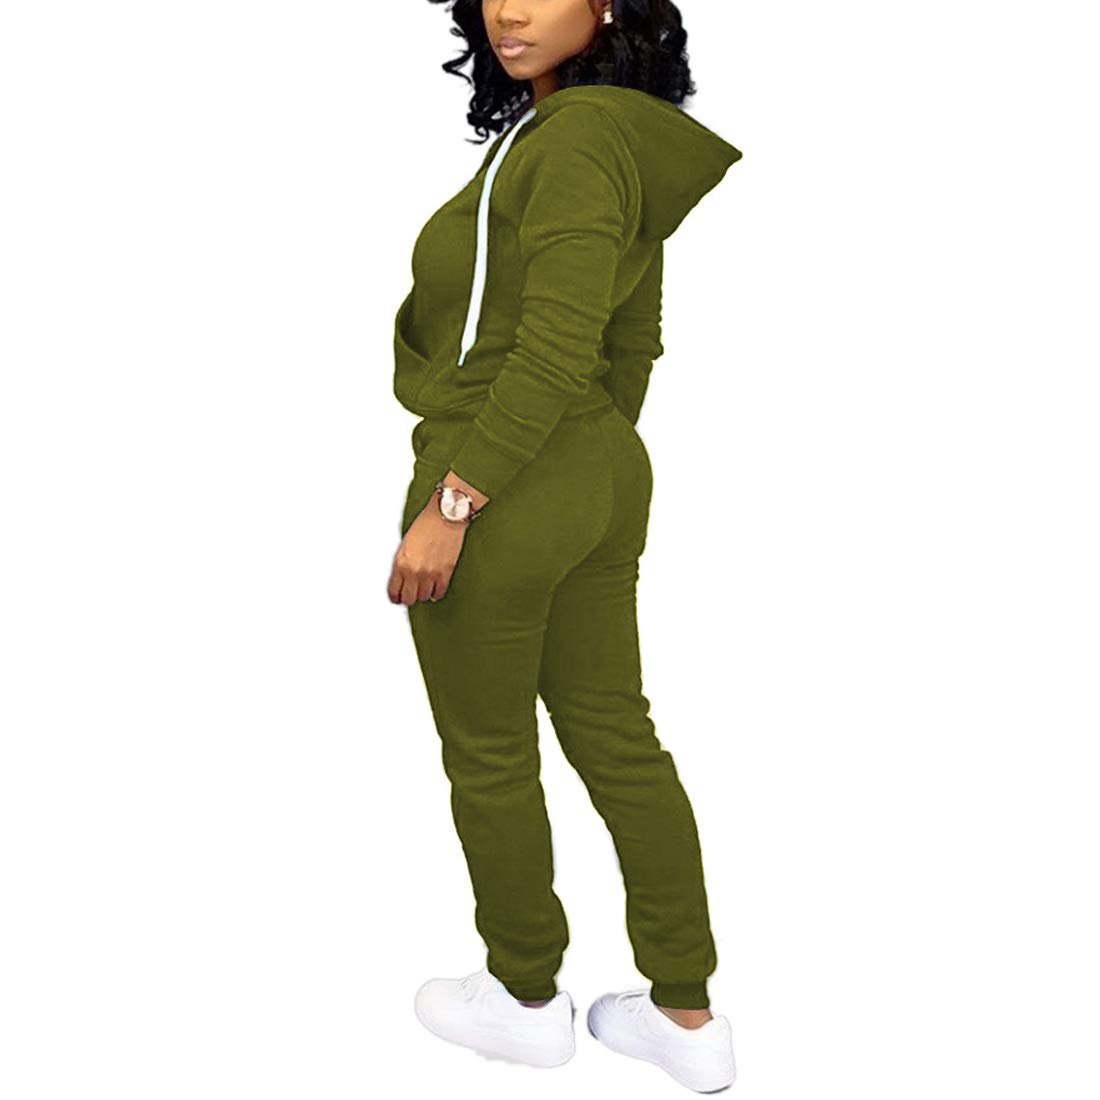 Nimsruc Jogging Suits for Women 2 Piece Tracksuit Long Sleeve Casual Hooded Zipper Pants Set Army Green L